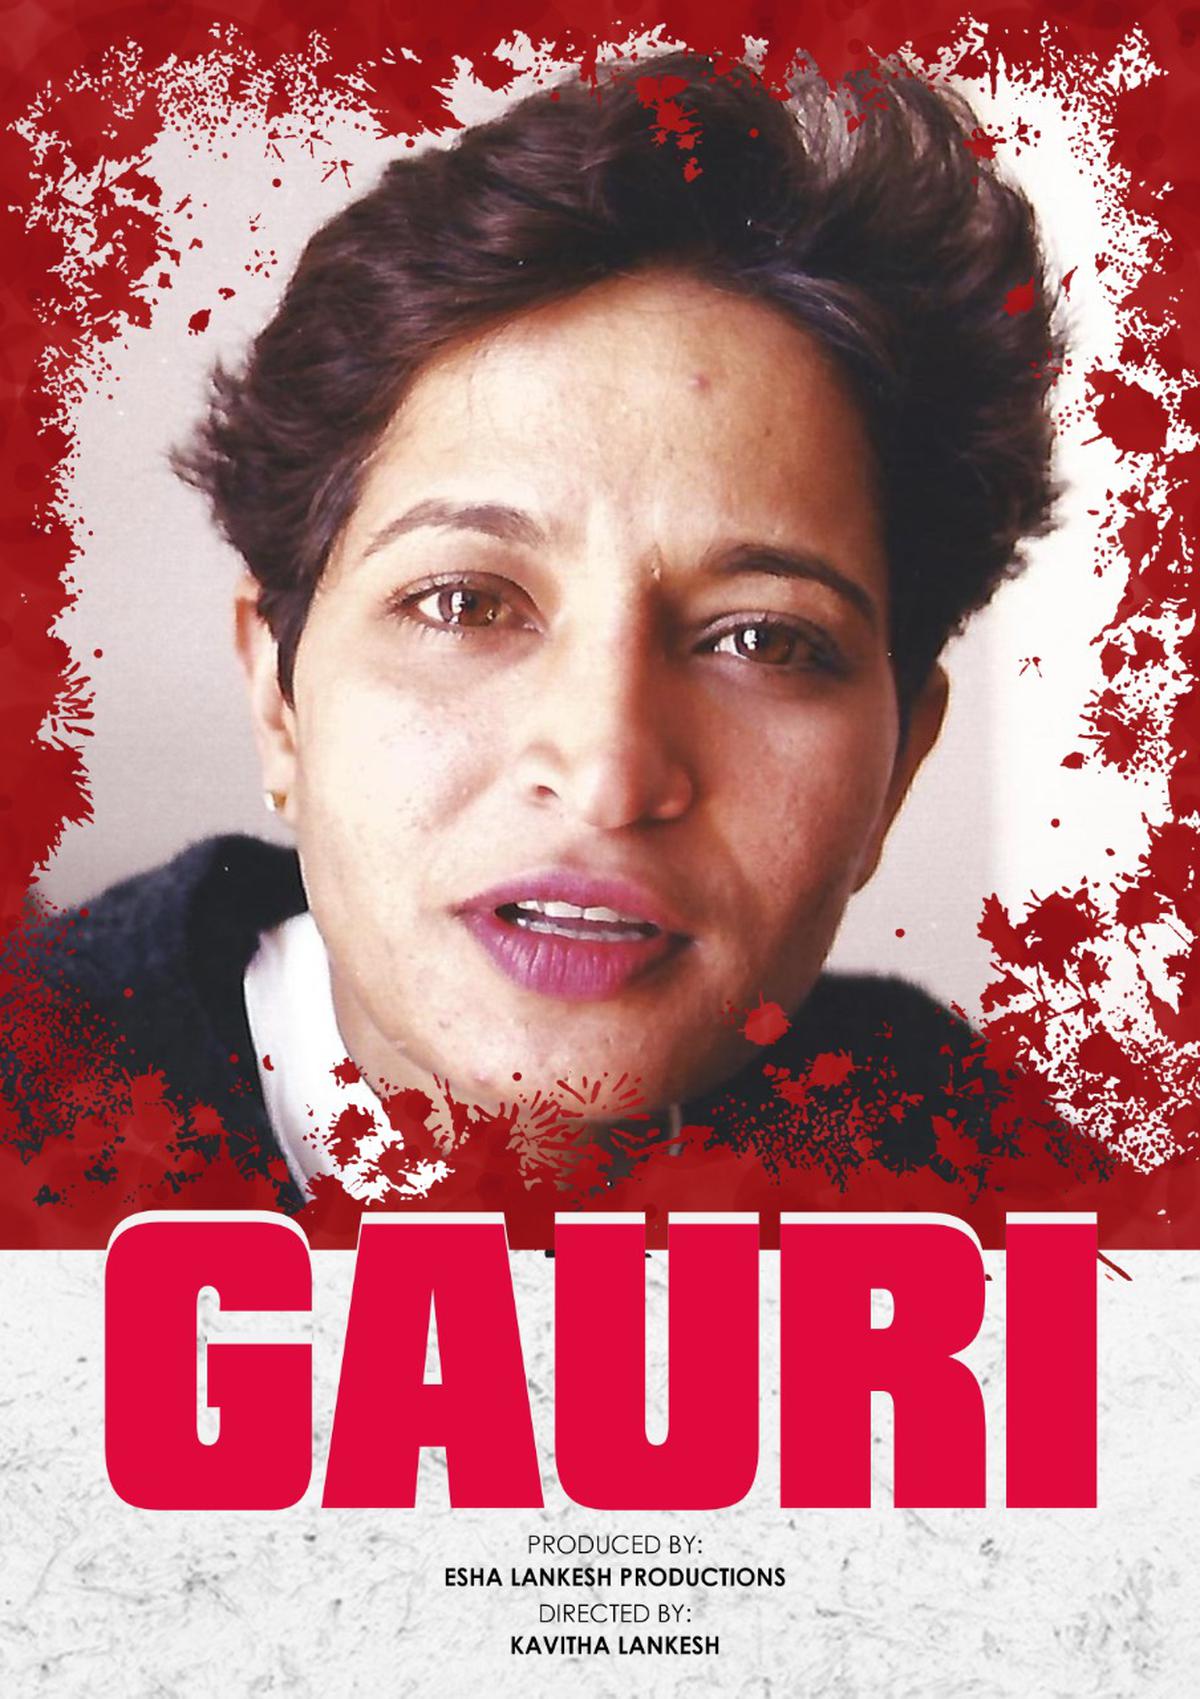 The documentary feature, Gauri, looks at the journalist and activist’s life and death in the context of the increasing attacks on the press and the rise of Hindu nationalism